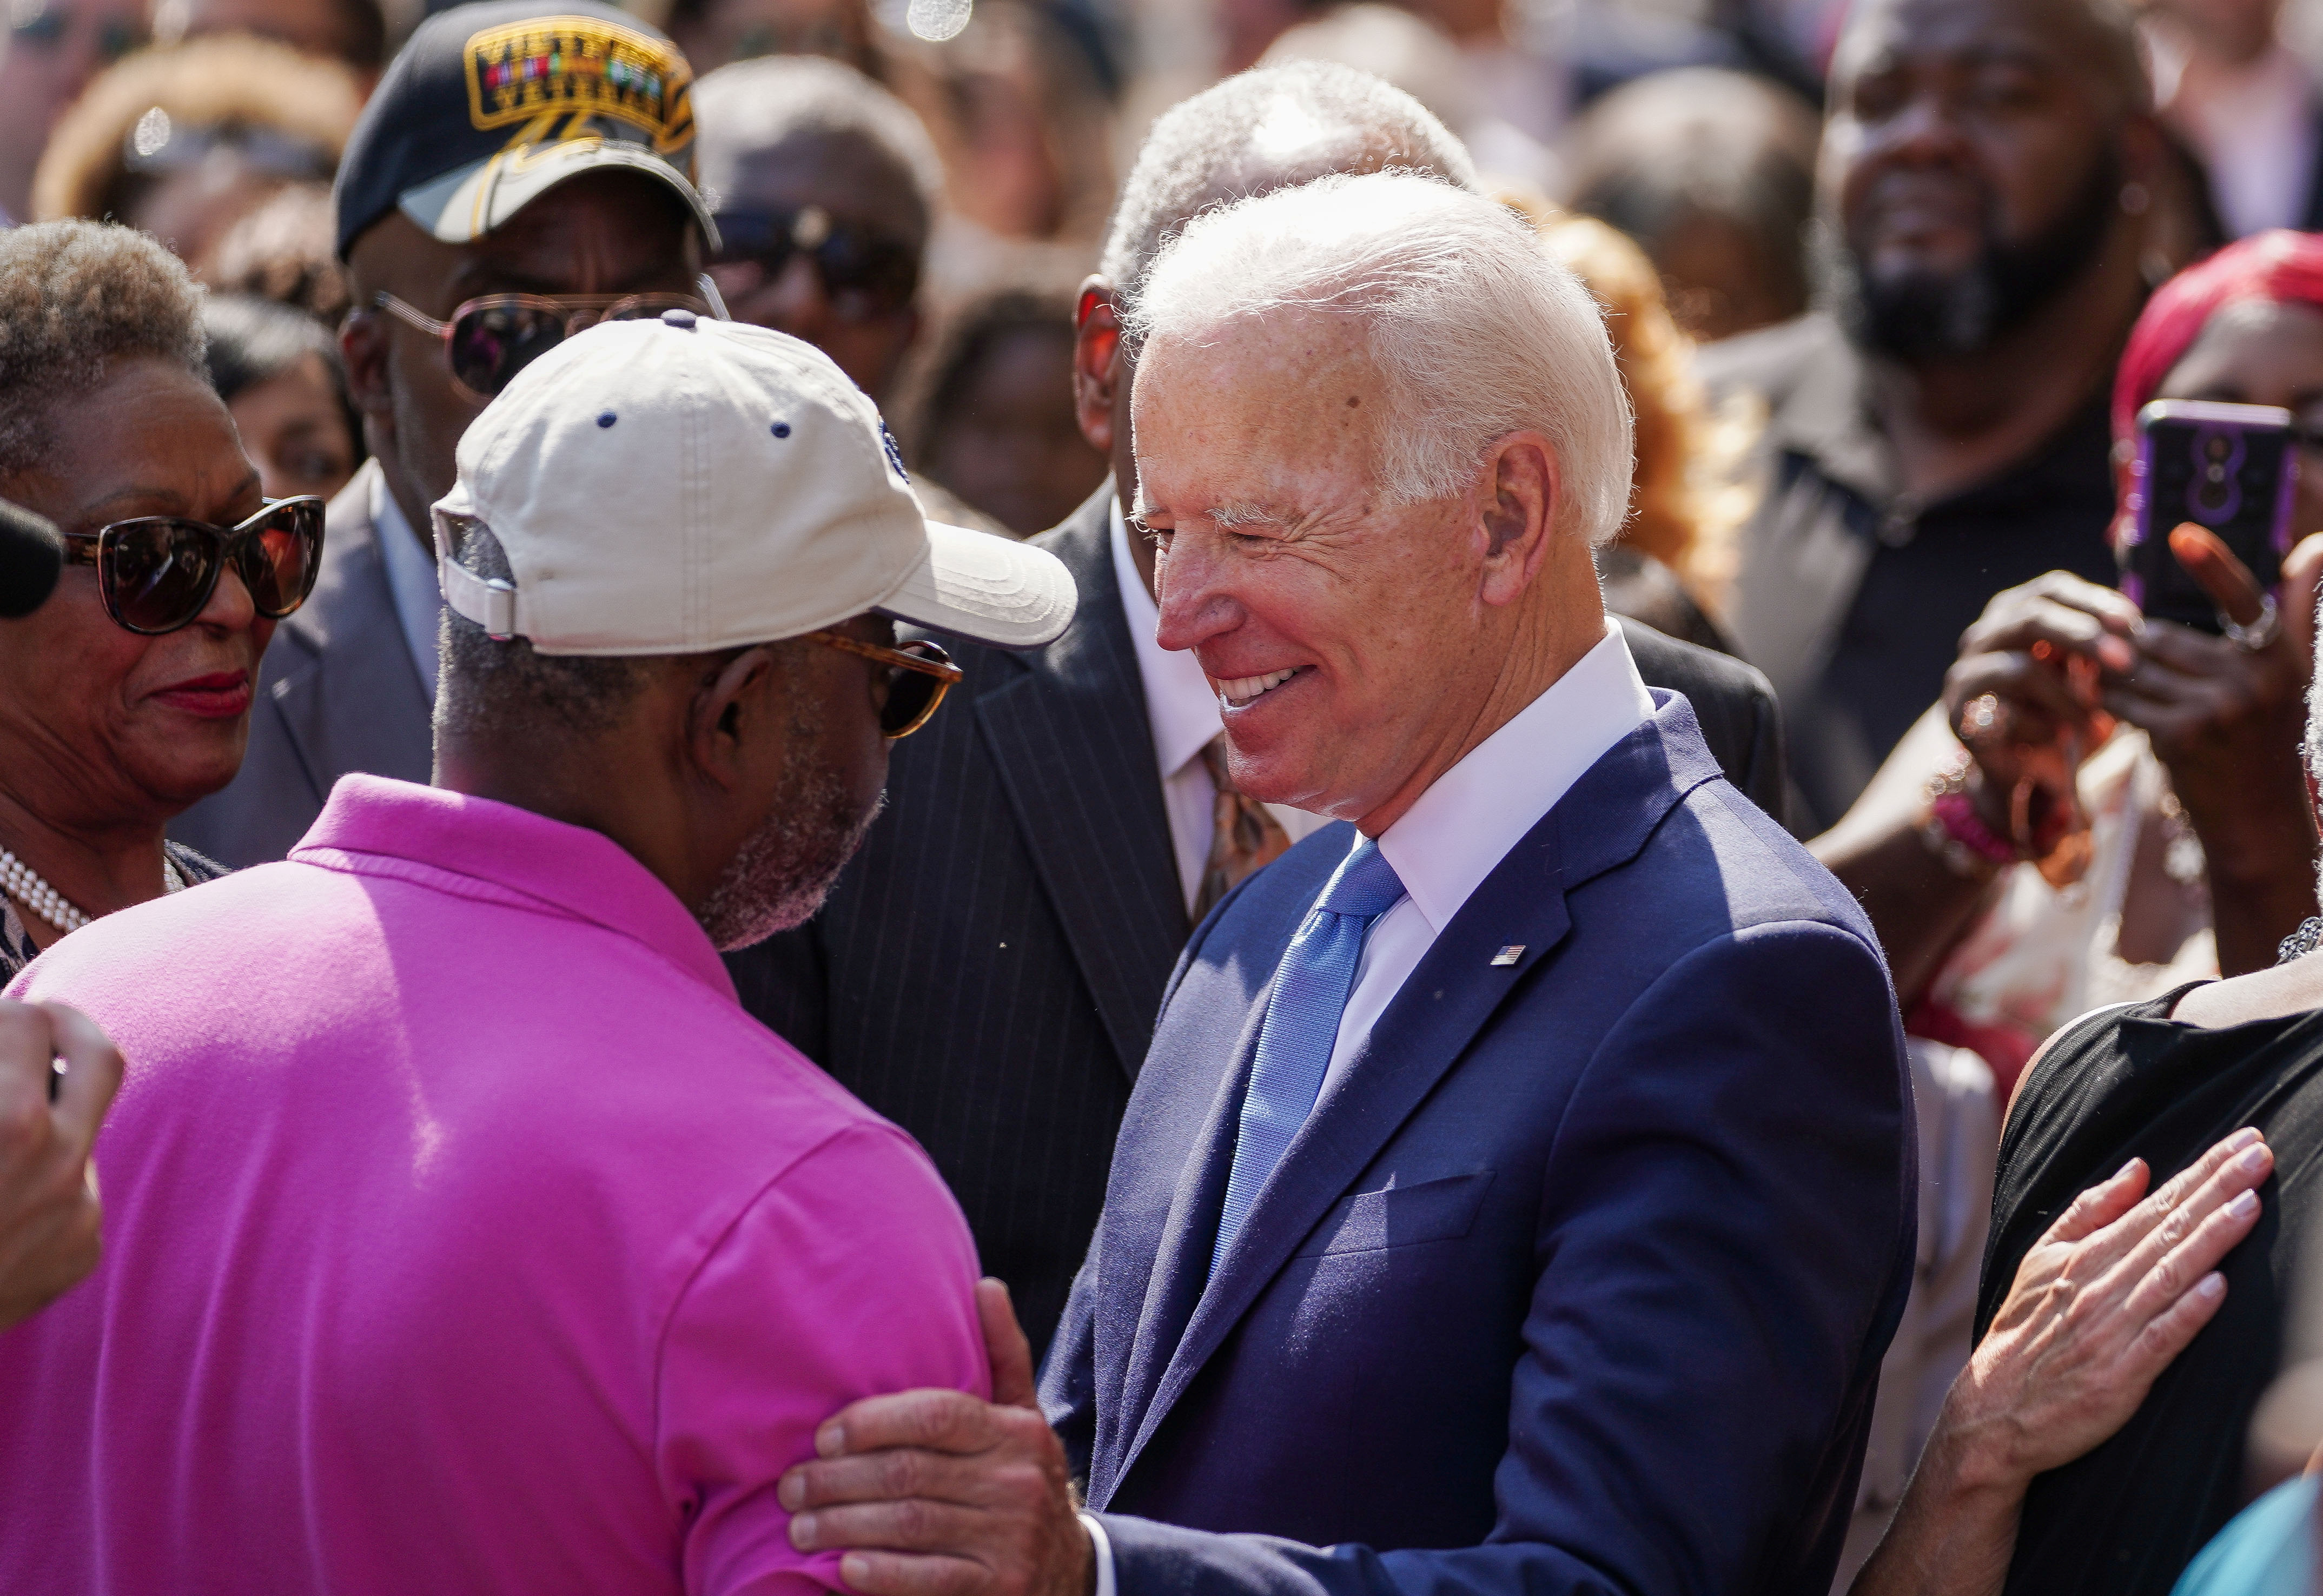 Democratic U.S. presidential candidate and former Vice President Joe Biden speaks with a man in the crowd at the "56th Memorial Observance of the Birmingham Church Bombing" at the 16th St. Baptist Church in Birmingham, Alabama, U.S. September 15, 2019. REUTERS/Marvin Gentry 